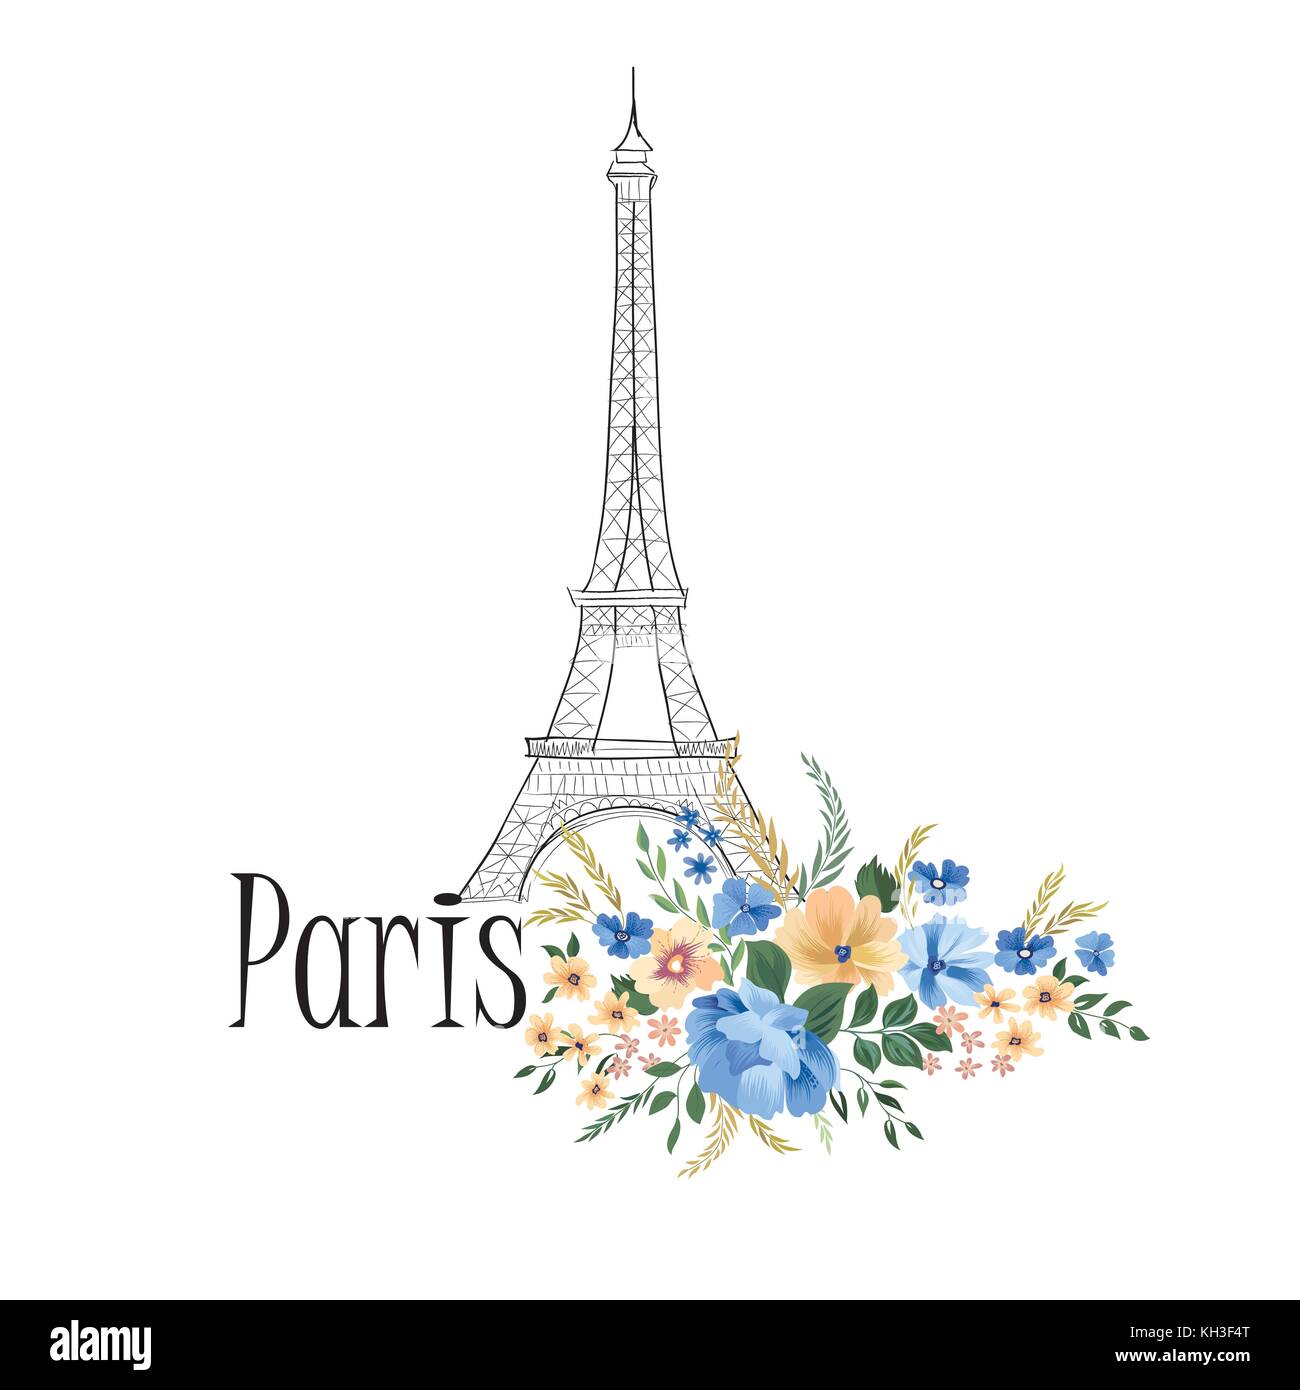 Paris background. Floral Parissign with flower bouquet and Eiffel tower landmark. Travel France icon Stock Vector